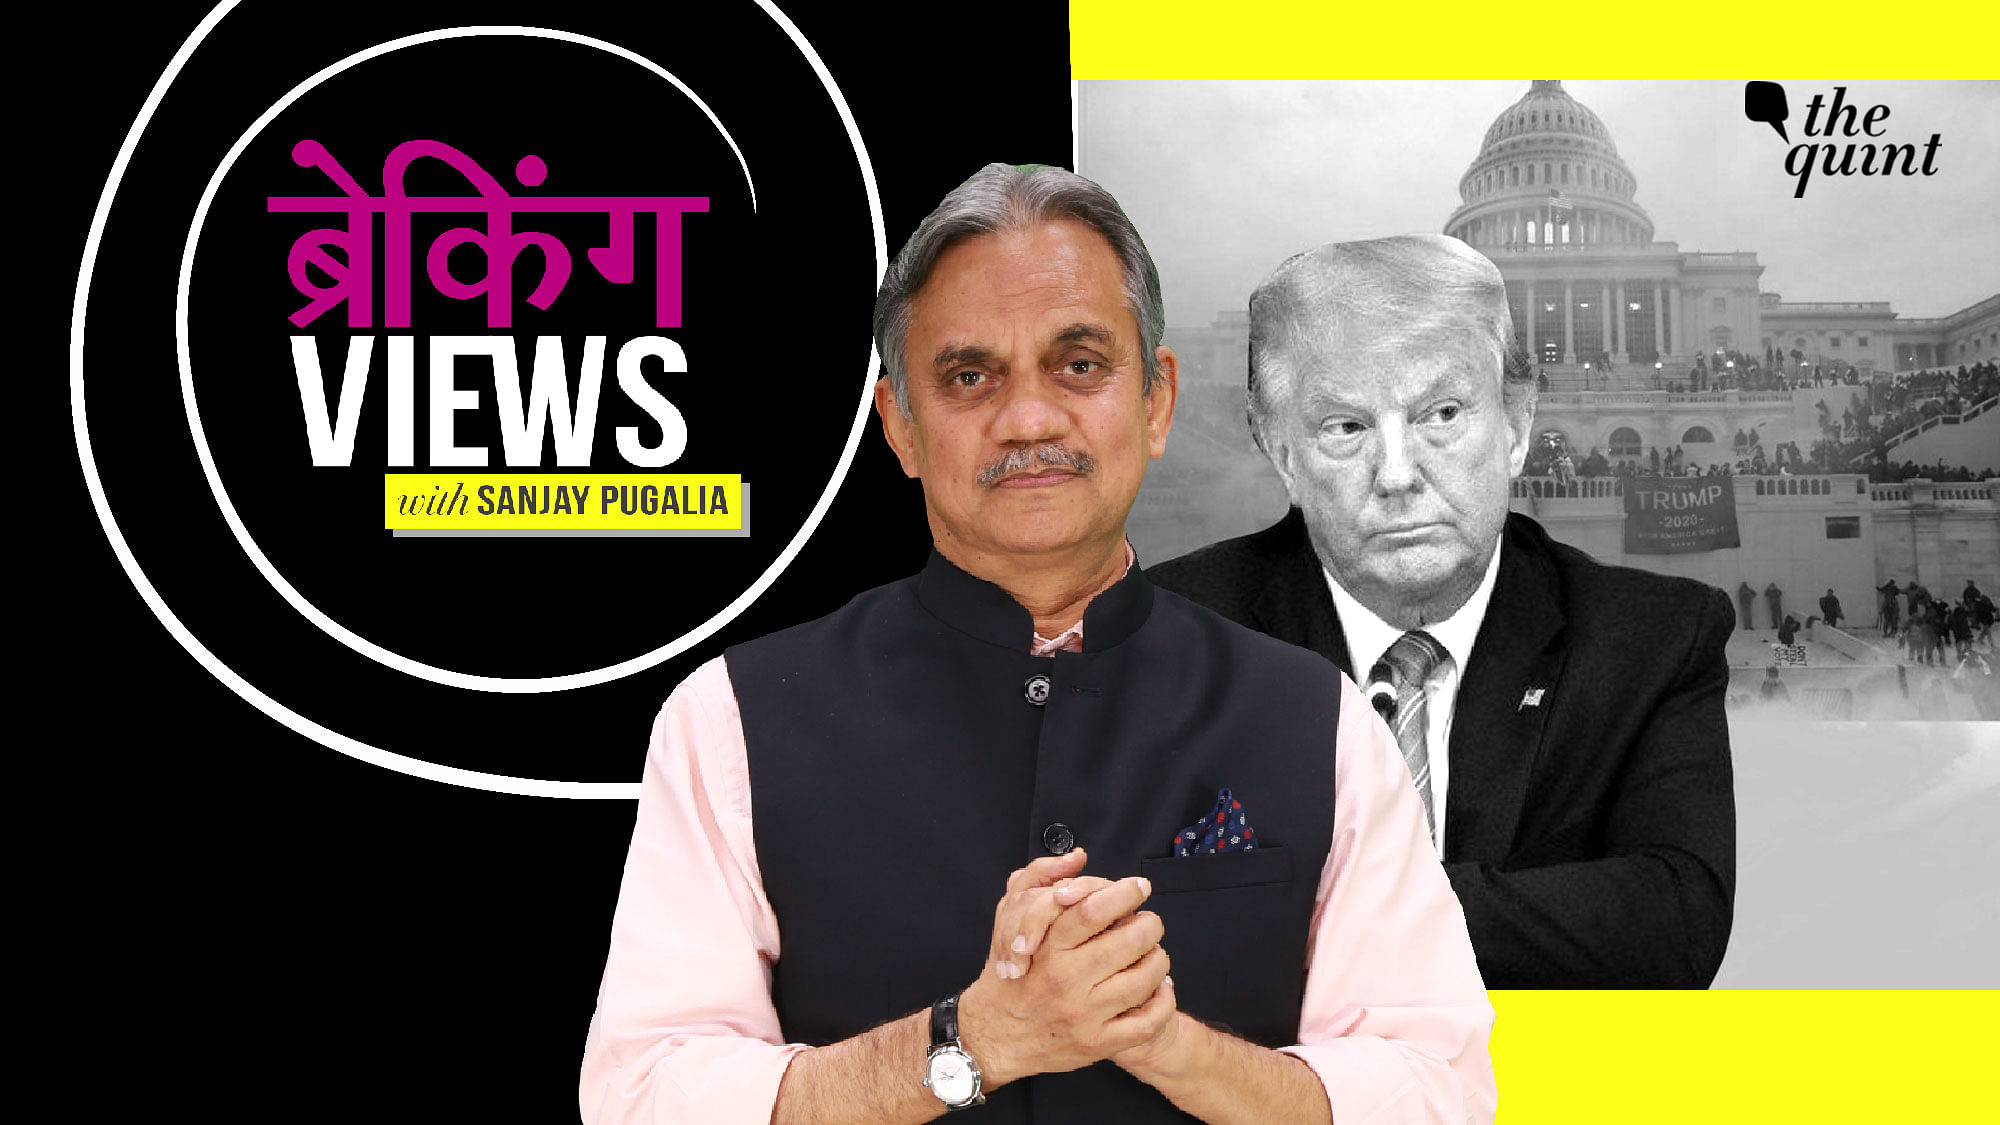 The Quint’s Editorial Director Sanjay Pugalia analyses the attack on US democracy.